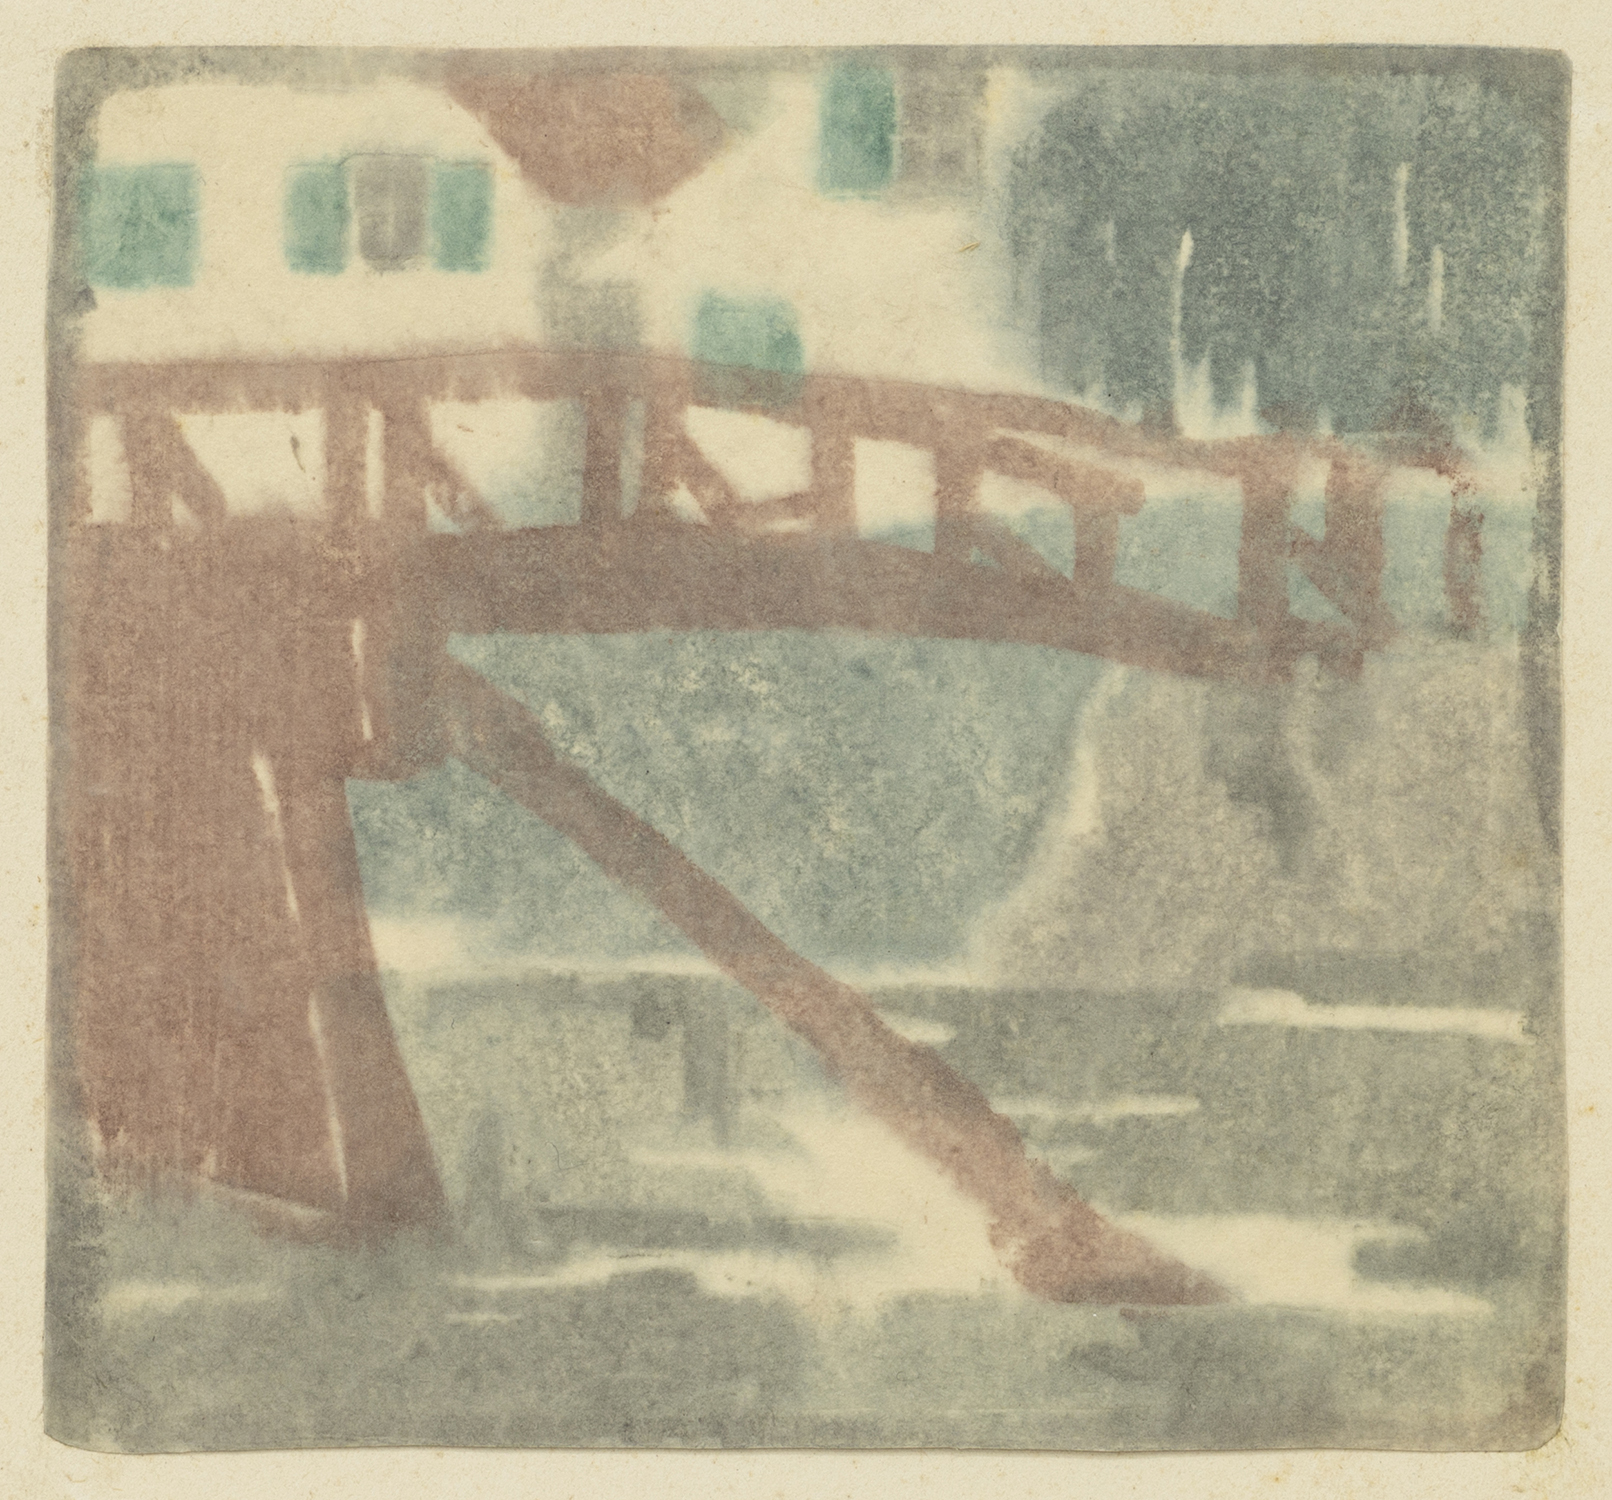 A Rainy Day - Nolfach, 1907, Color woodblock, 10 1/4 x 9 inches (26 x 22.9 cm), Edition size unknown, rare